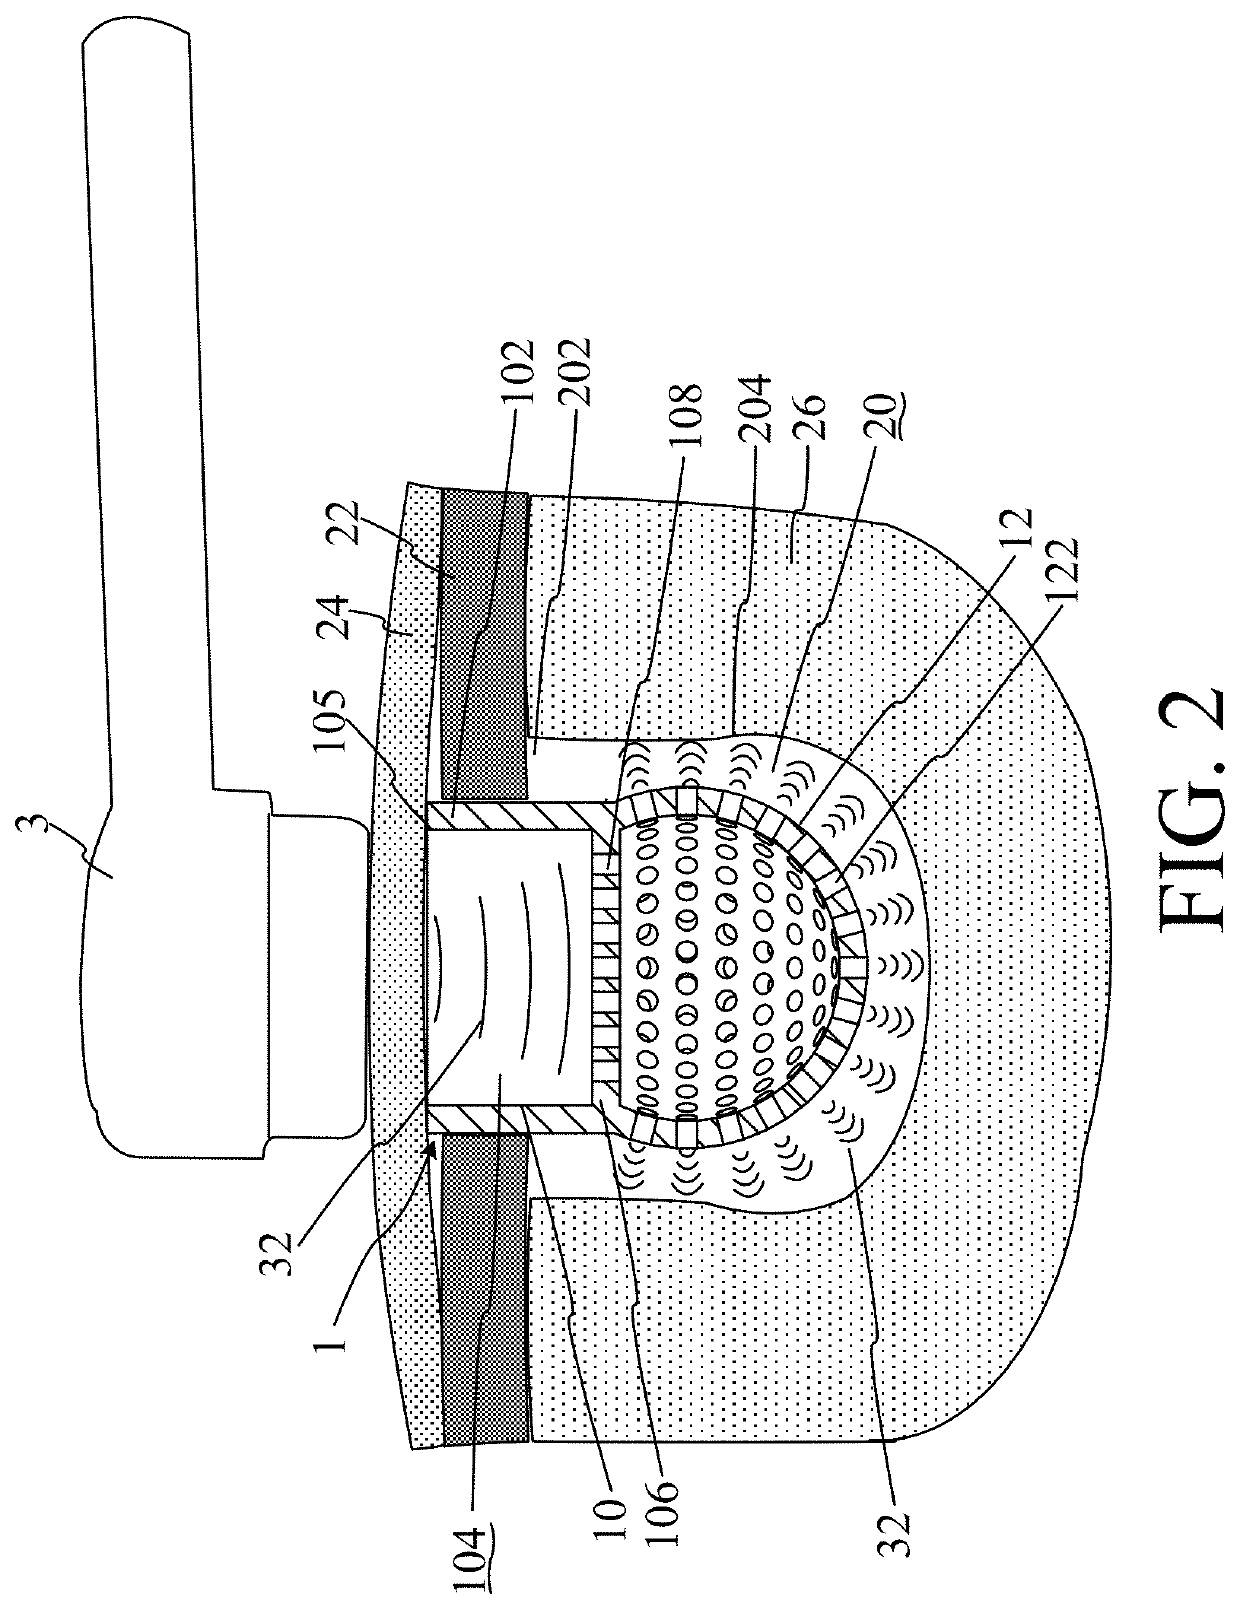 Implantable ultrasound conducting and drug delivering apparatus